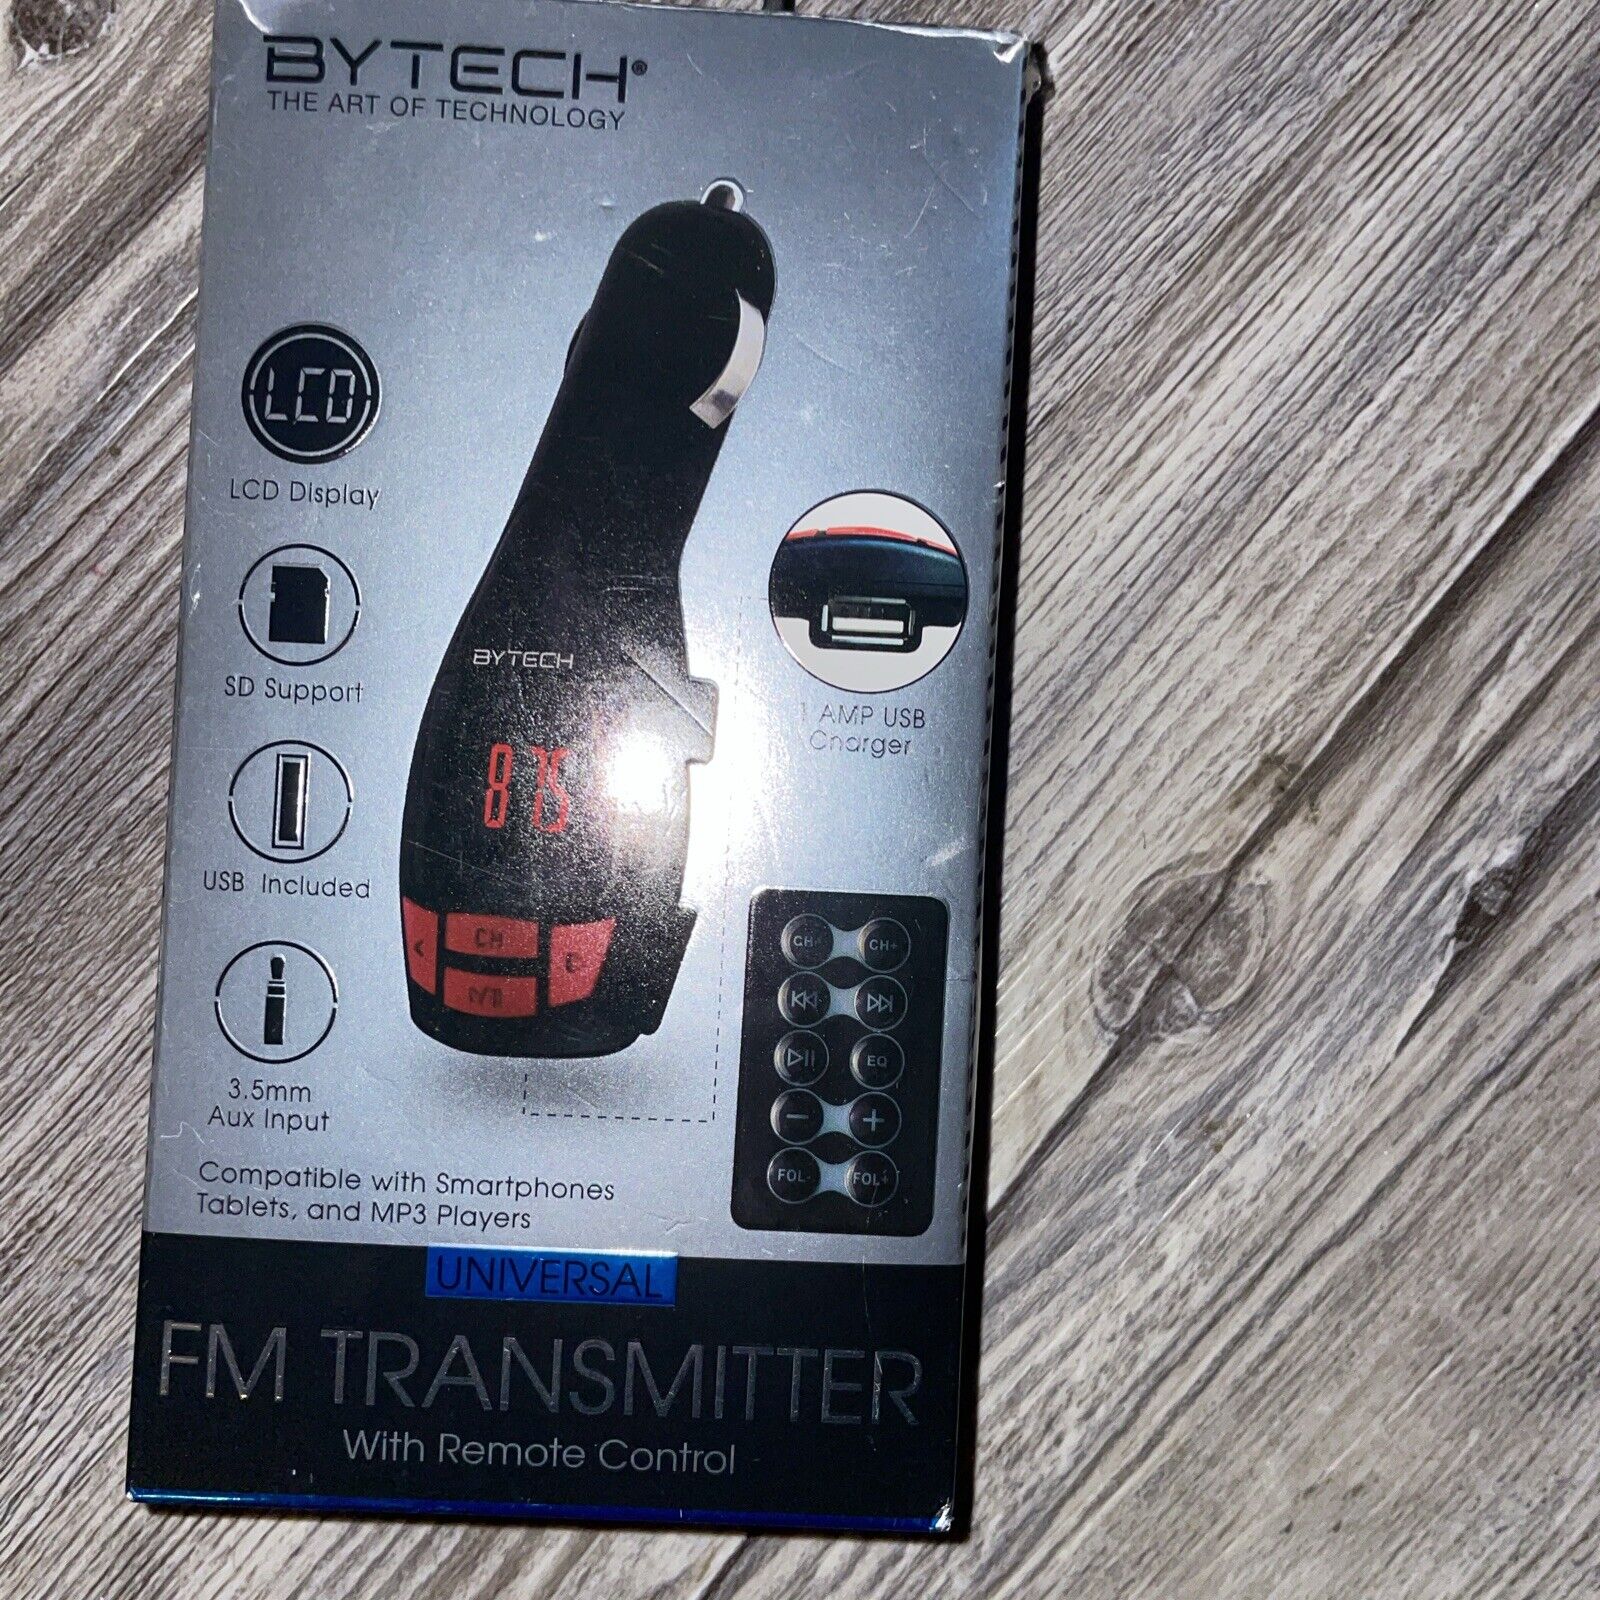 Bytech Universal FM Transmitter with Remote Control And USB Bytech Does Not Apply